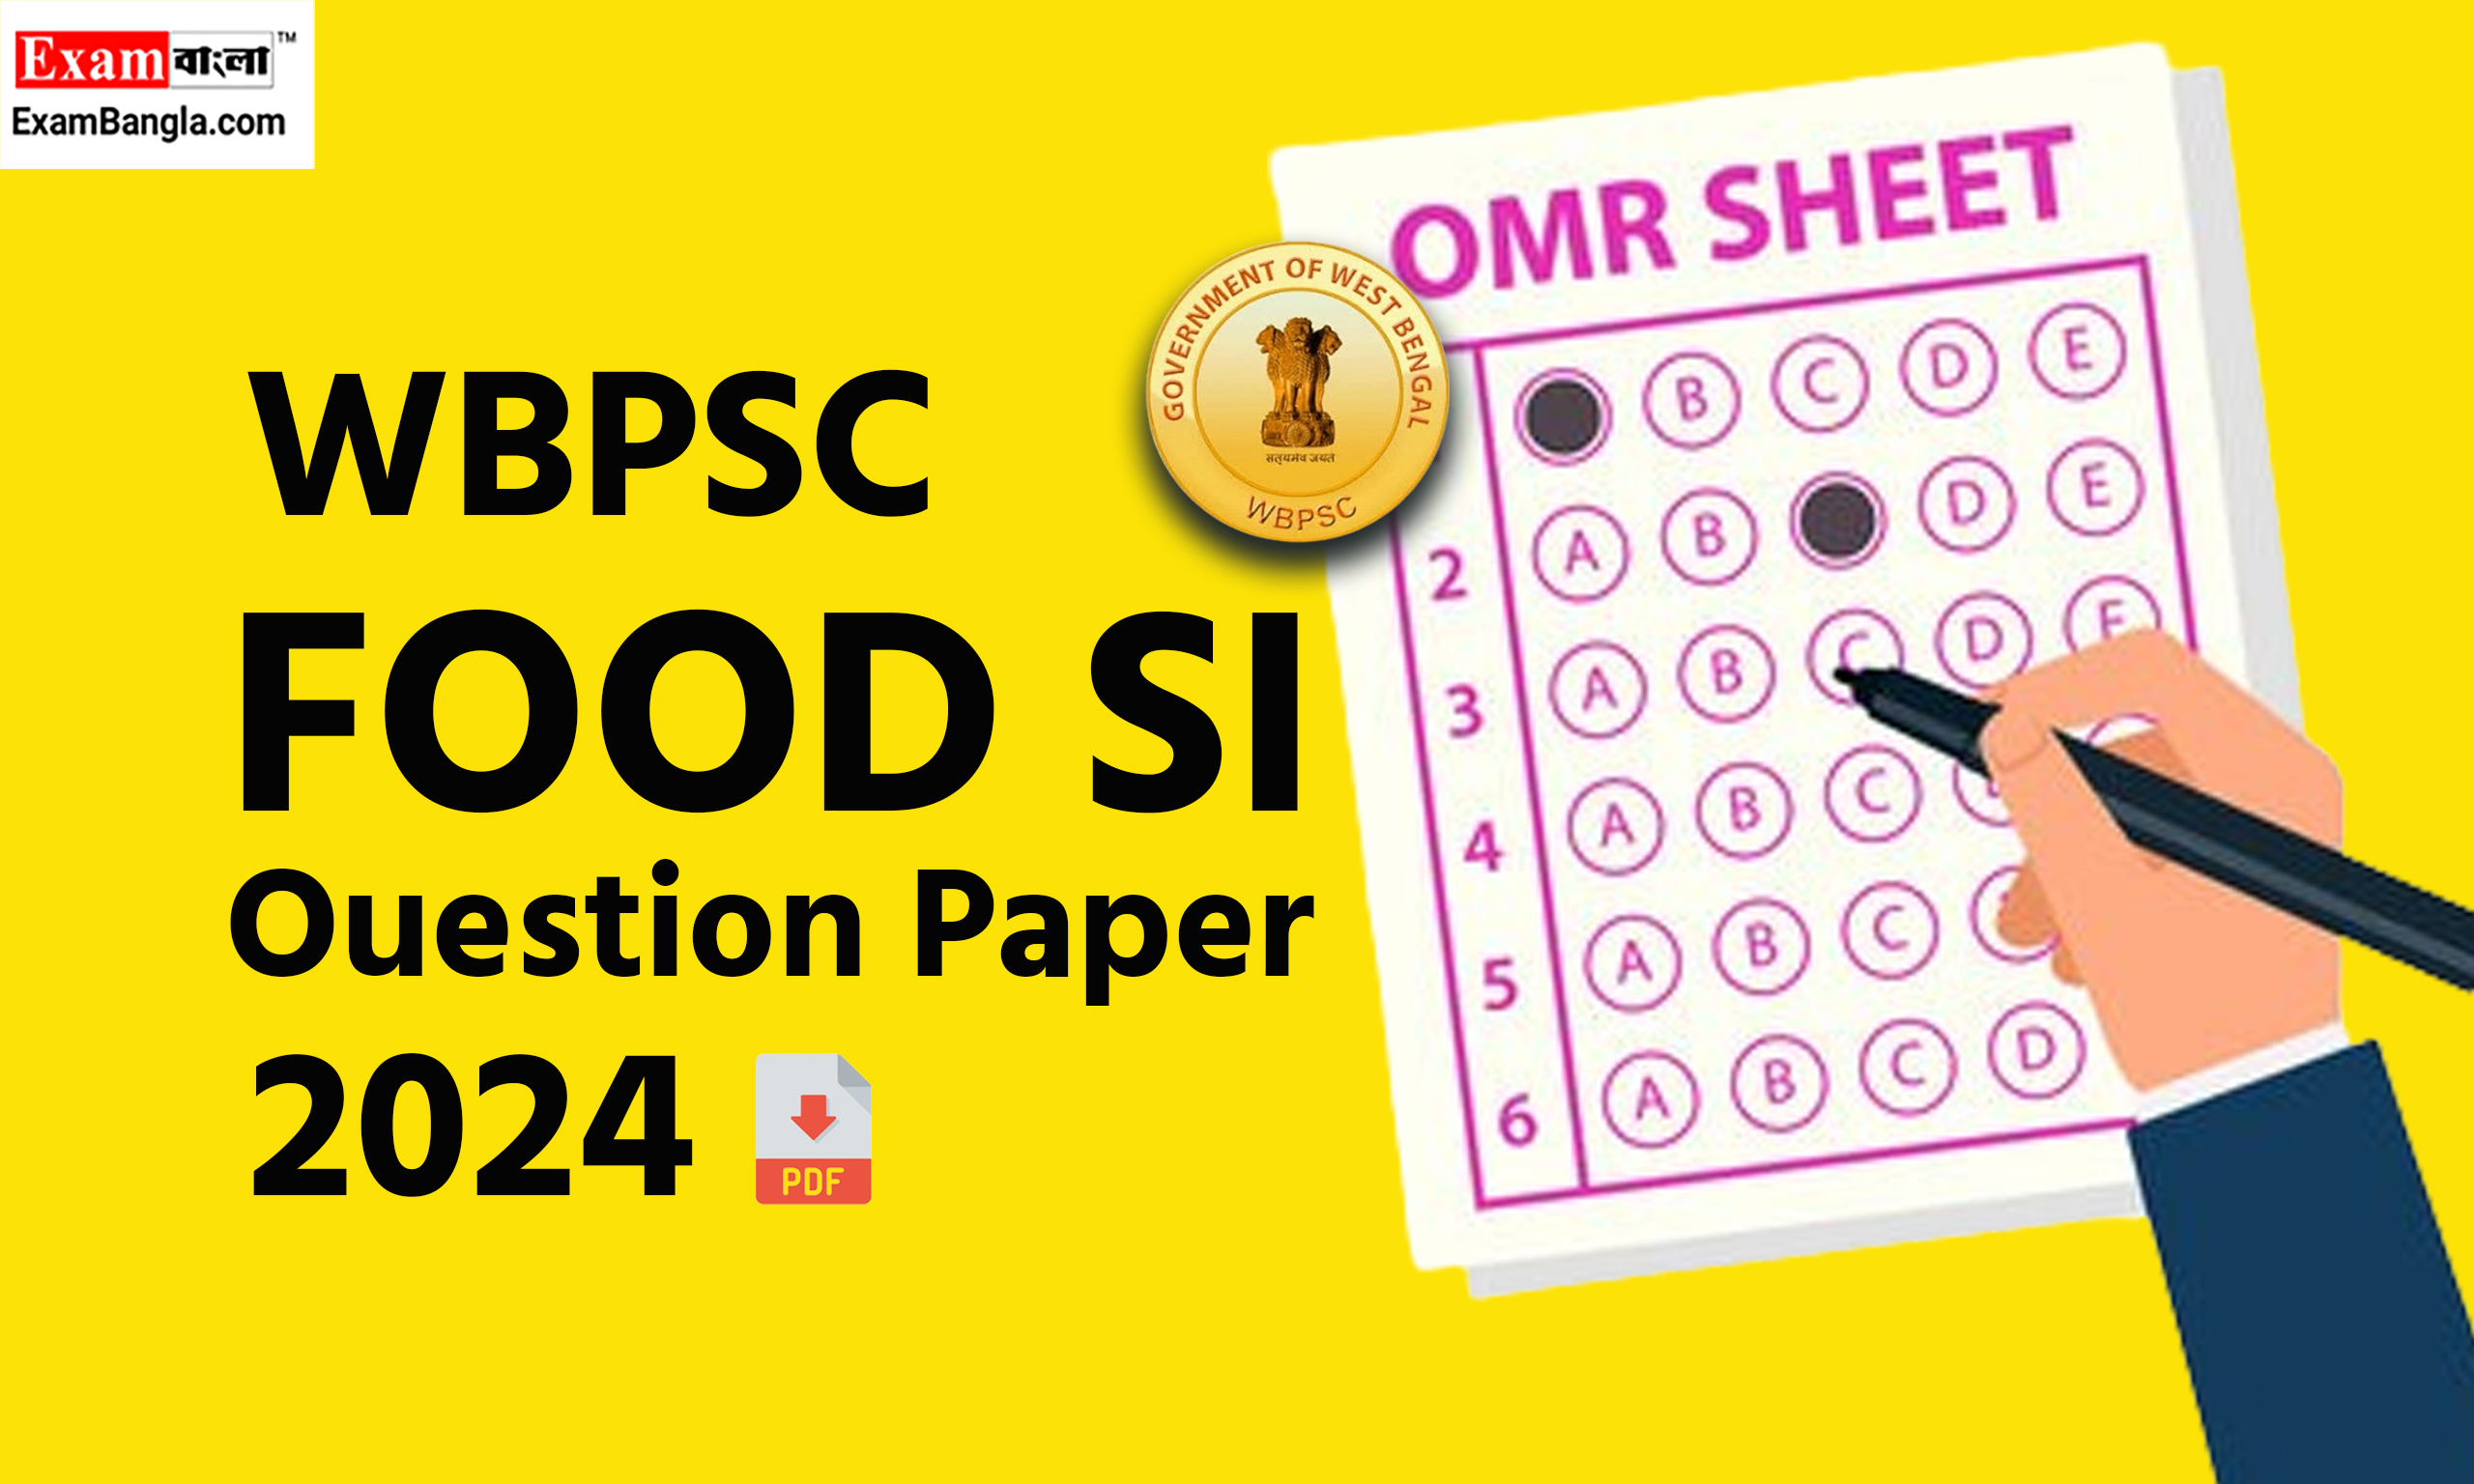 WBPSC Food SI Question Paper 2024